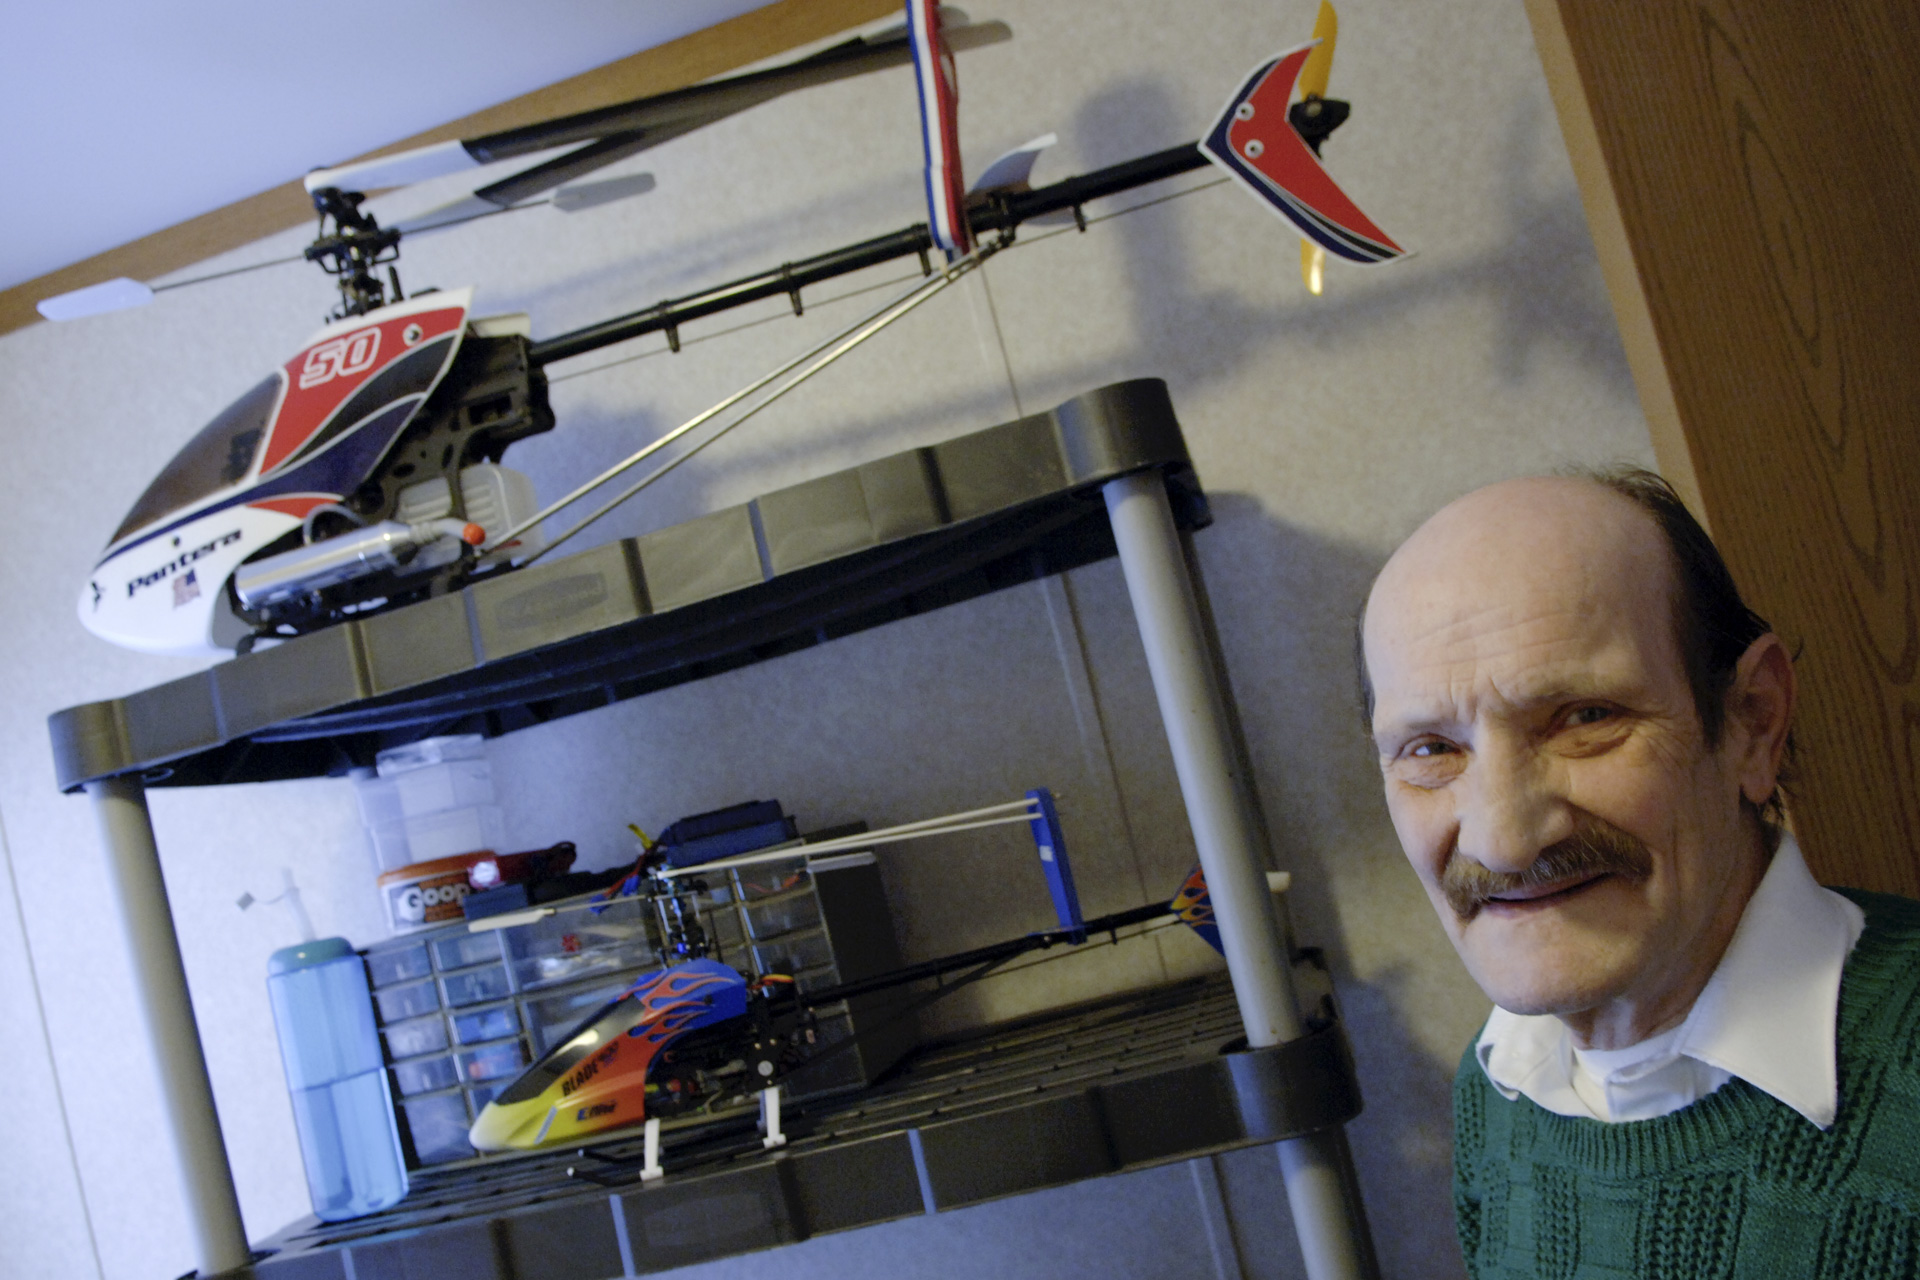 Man stands in room with model airplanes behind him